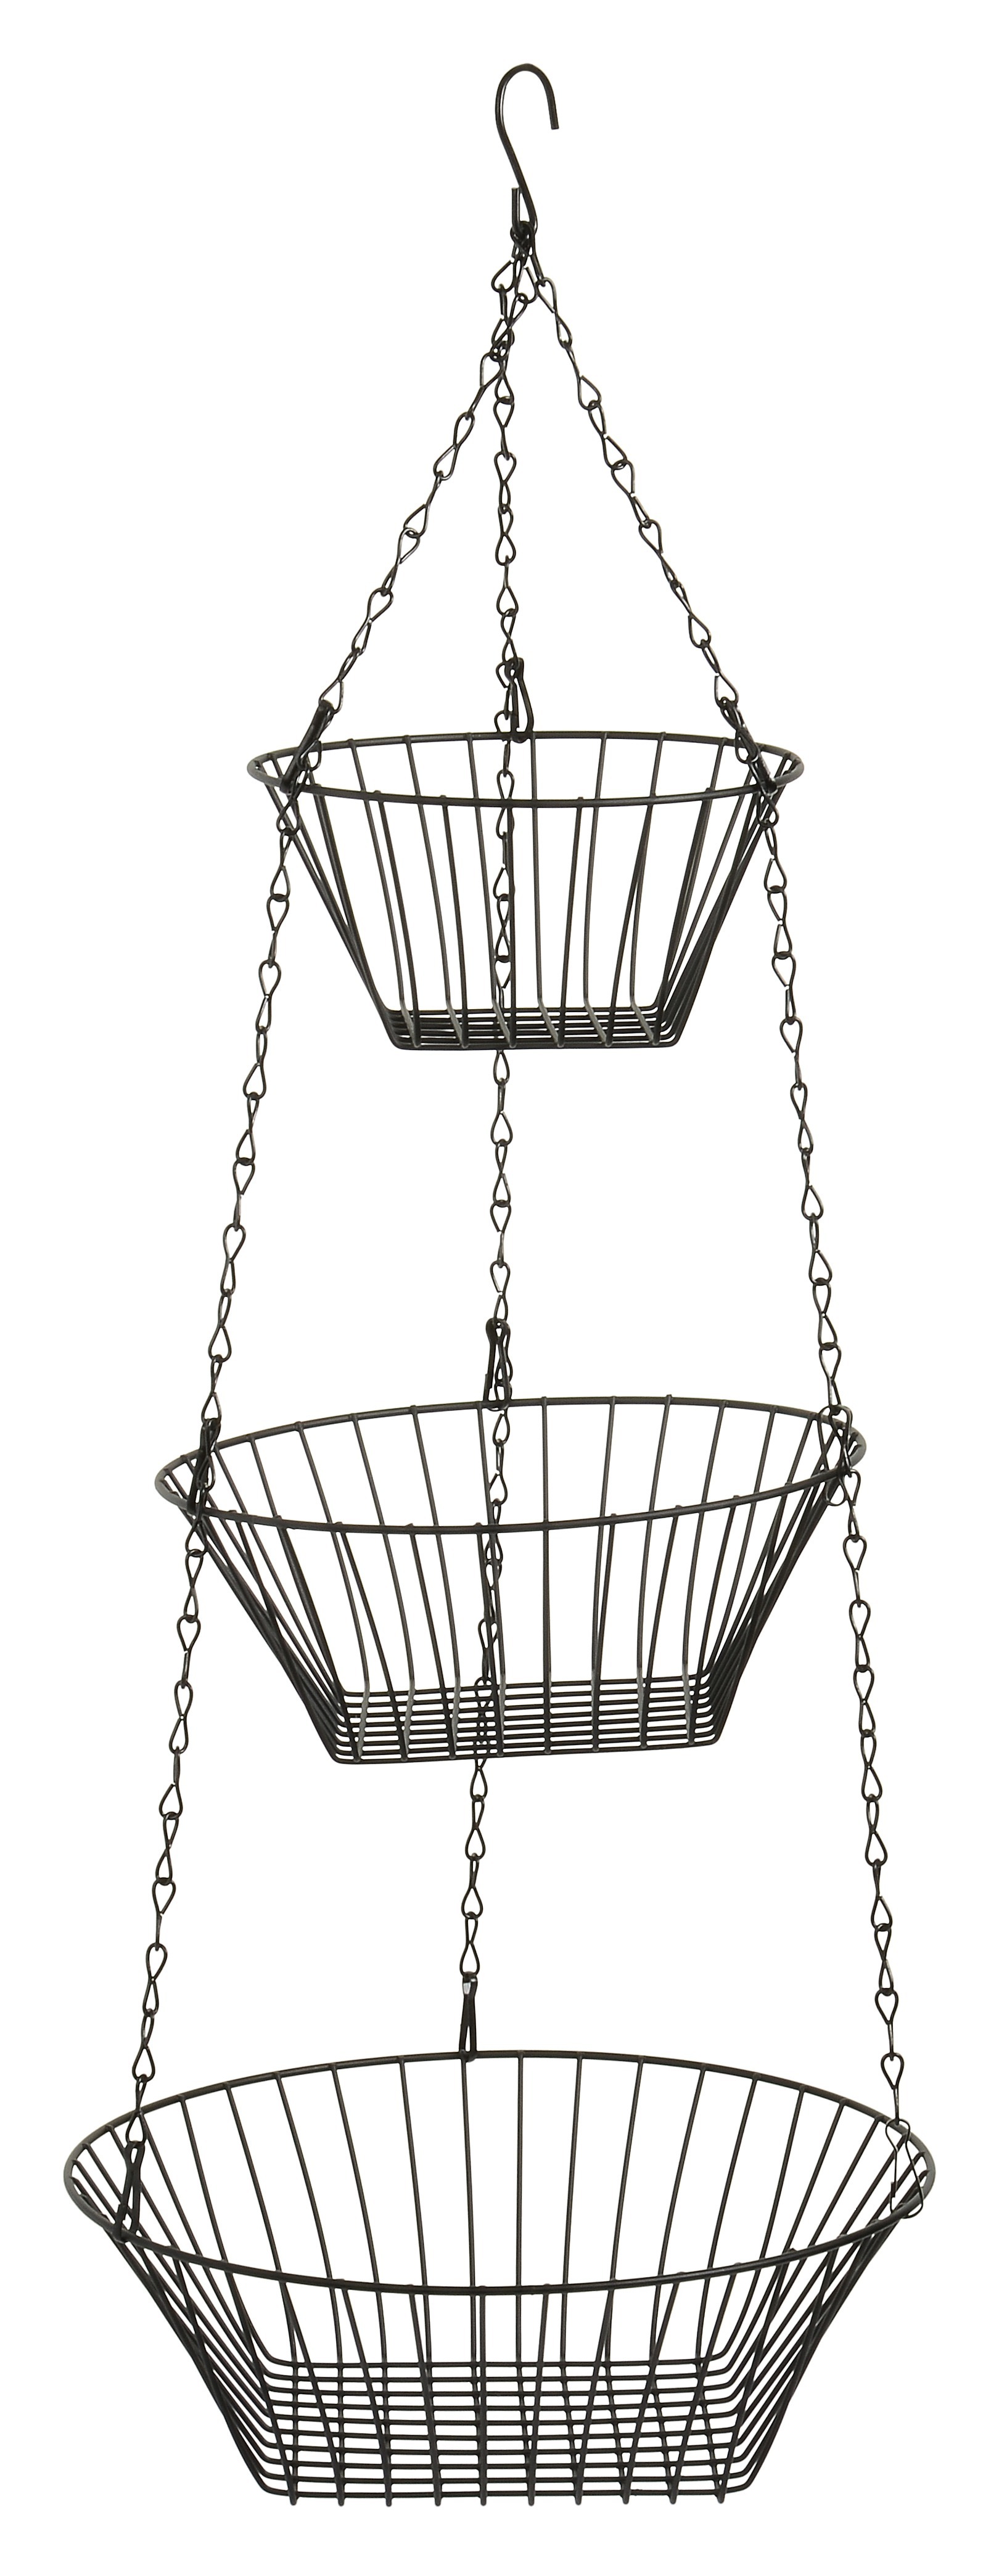 Hanging Fruit Basket 3 Tier, Round, For Kitchen, Black, 25 Inches Long